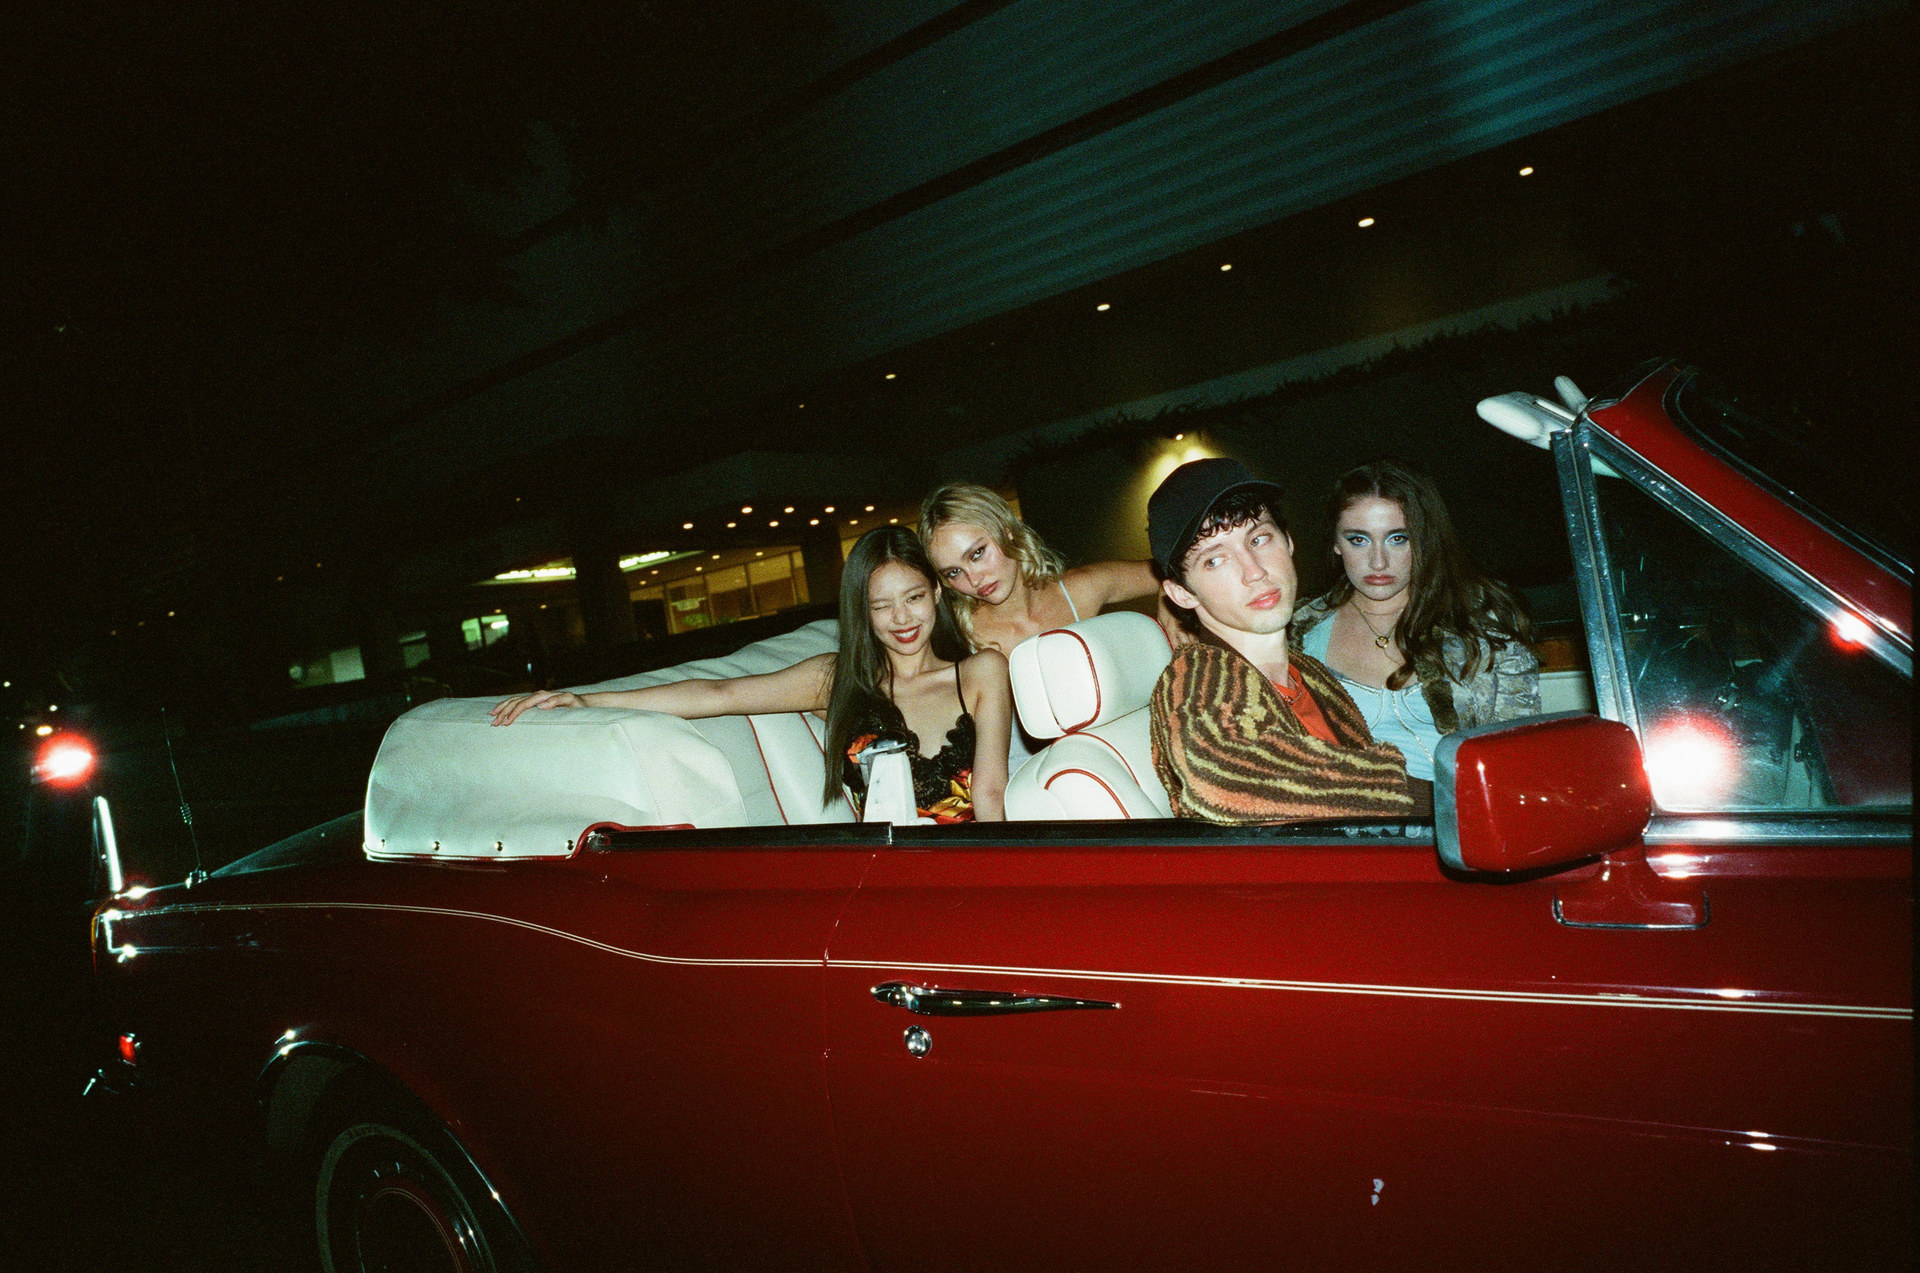 Jocelyn and friends in a convertible car in a scene from The Idol